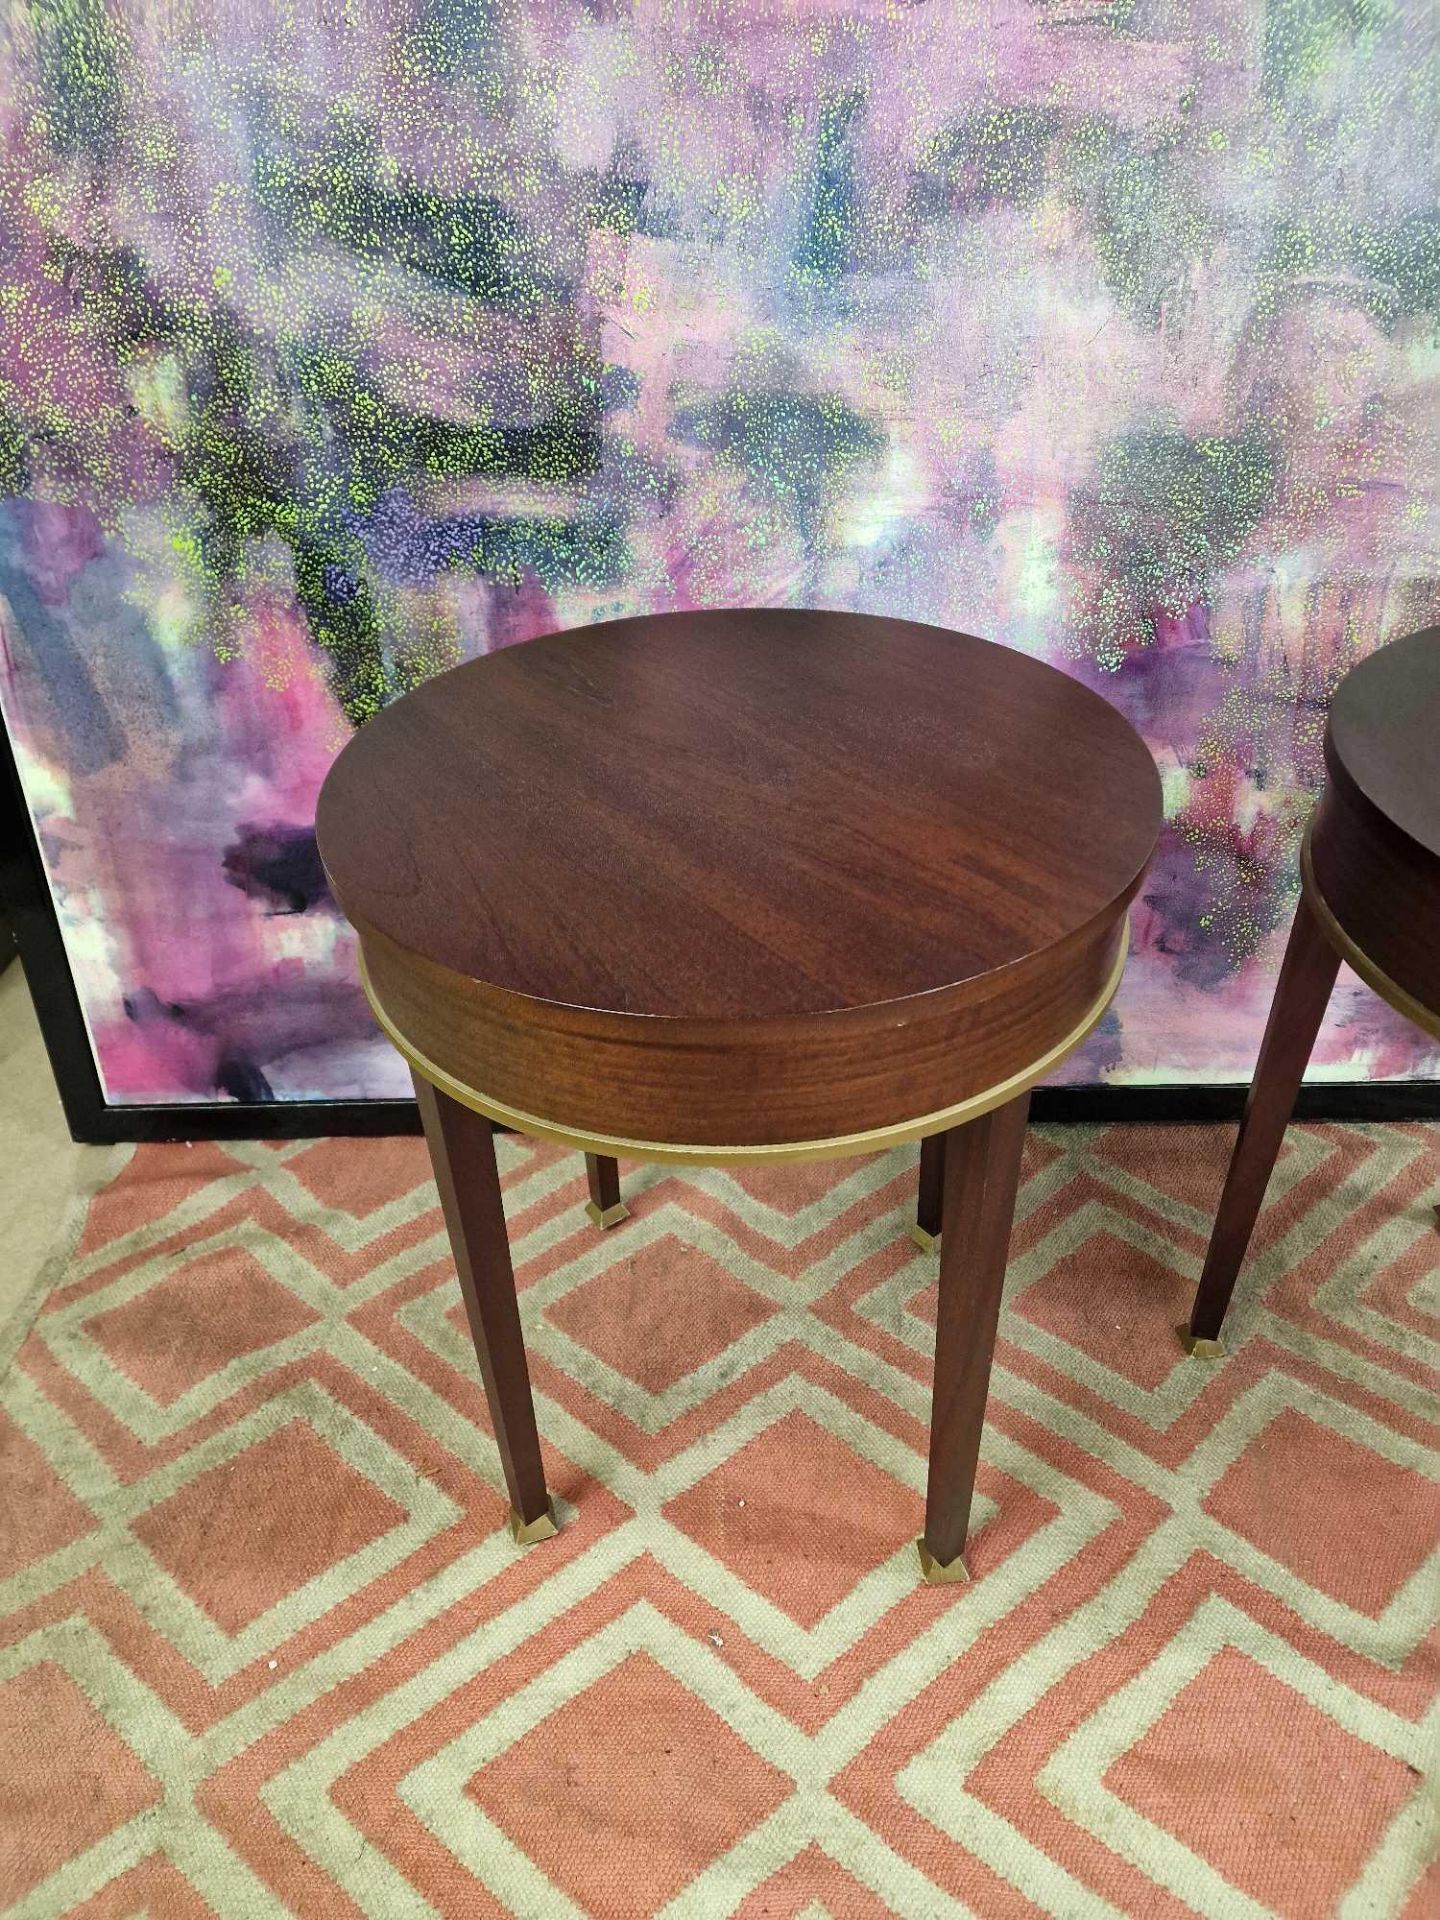 A Pair Of Mahogany Drum Side Tables With Circular Tops 55cm In Diameter With Brass Trim Details On